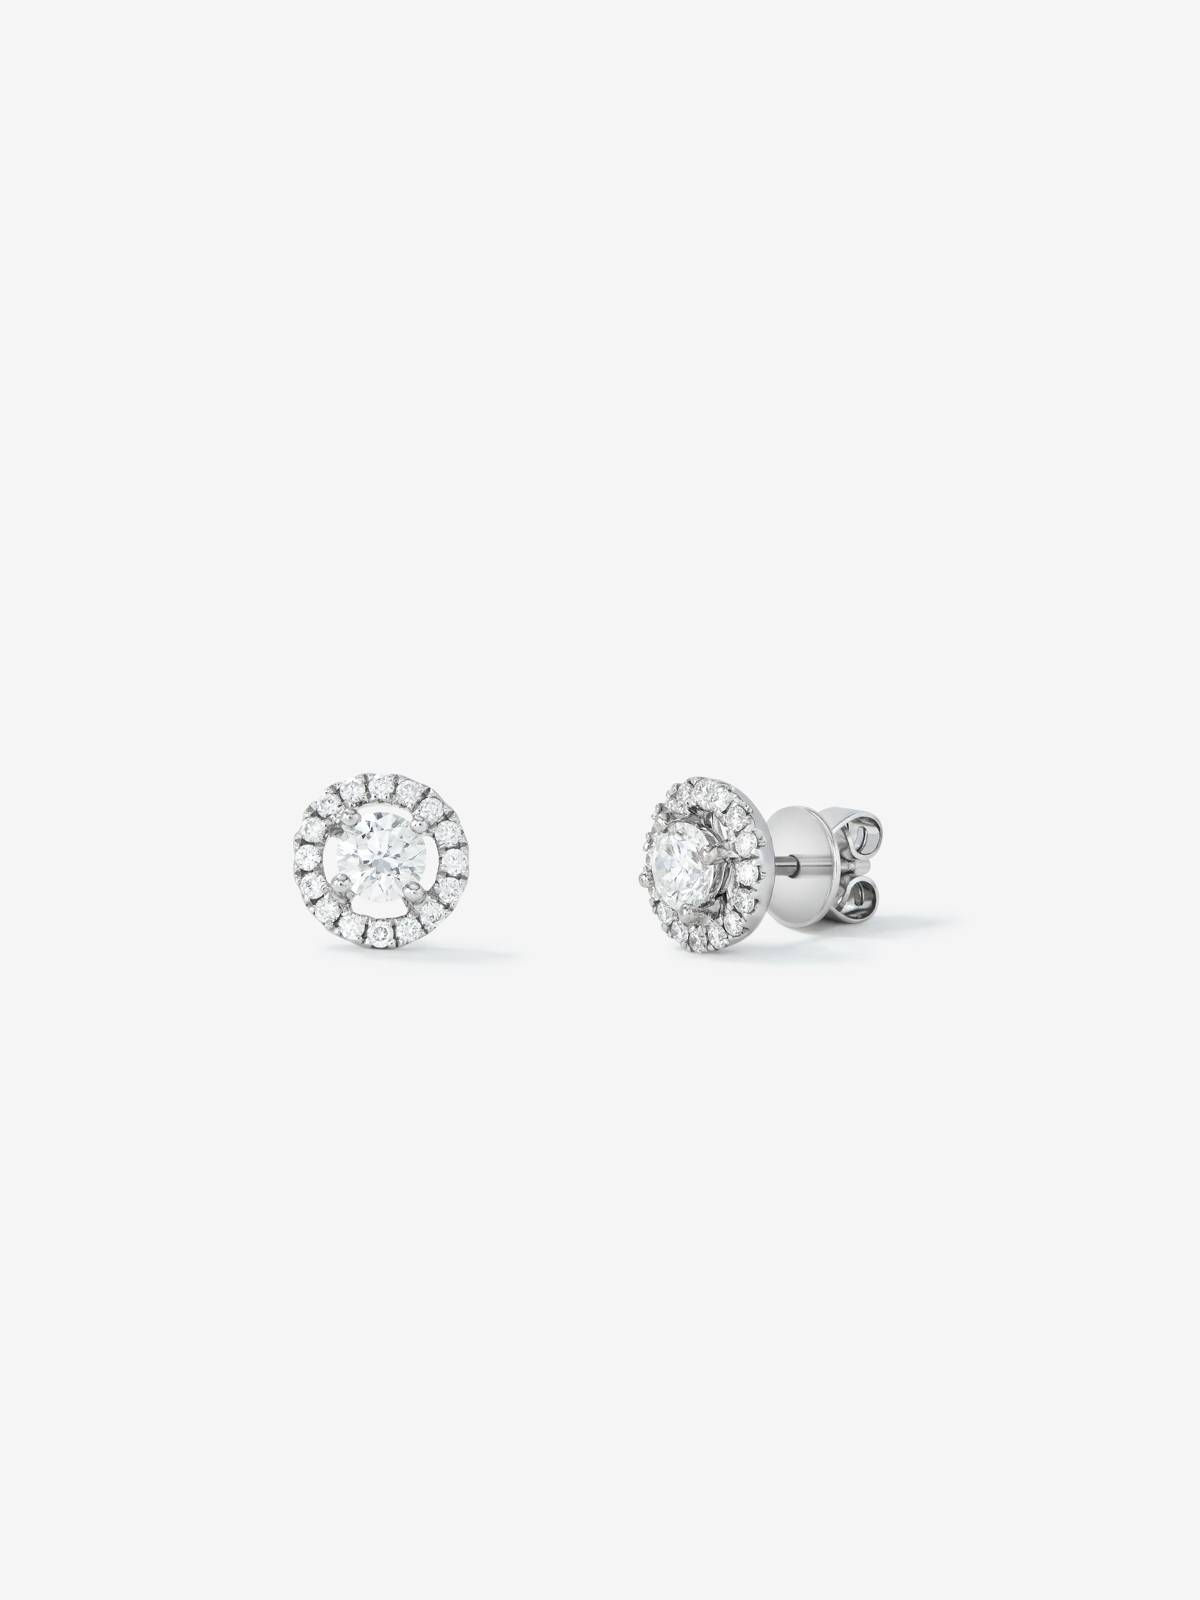 18K white gold earrings with solitaire diamond and diamond halo.